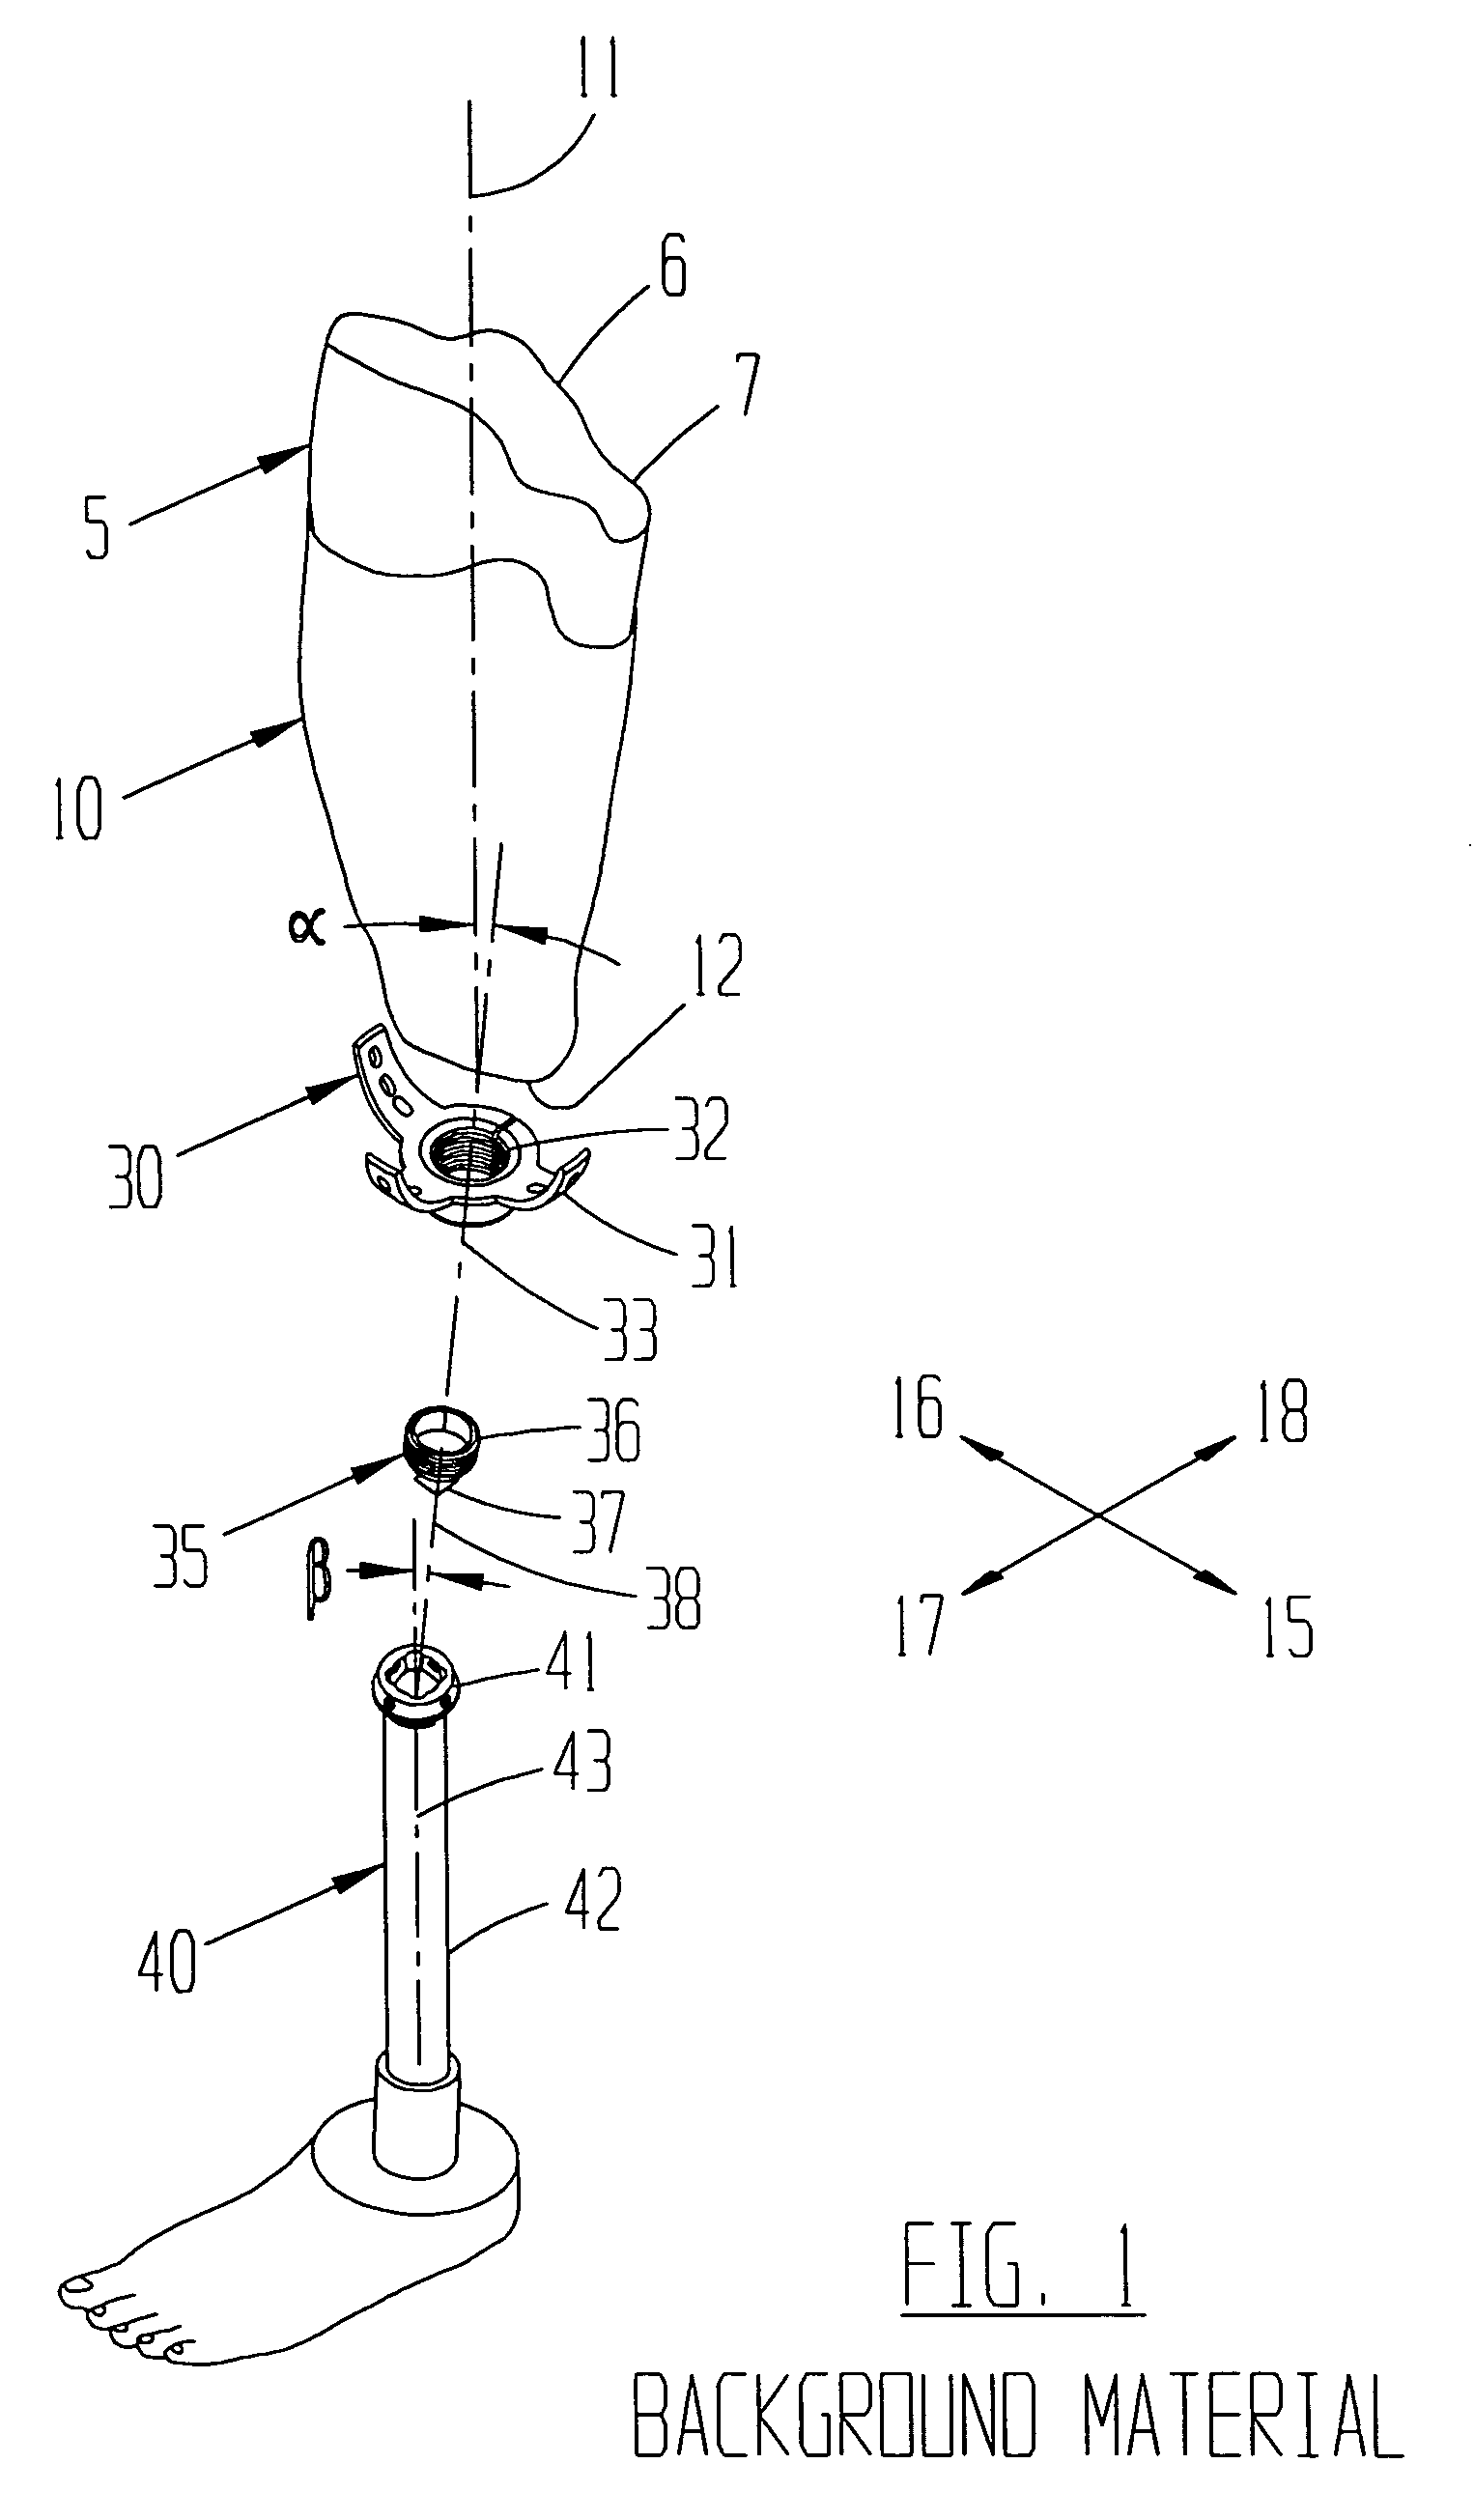 Device for offsetting prosthetic components